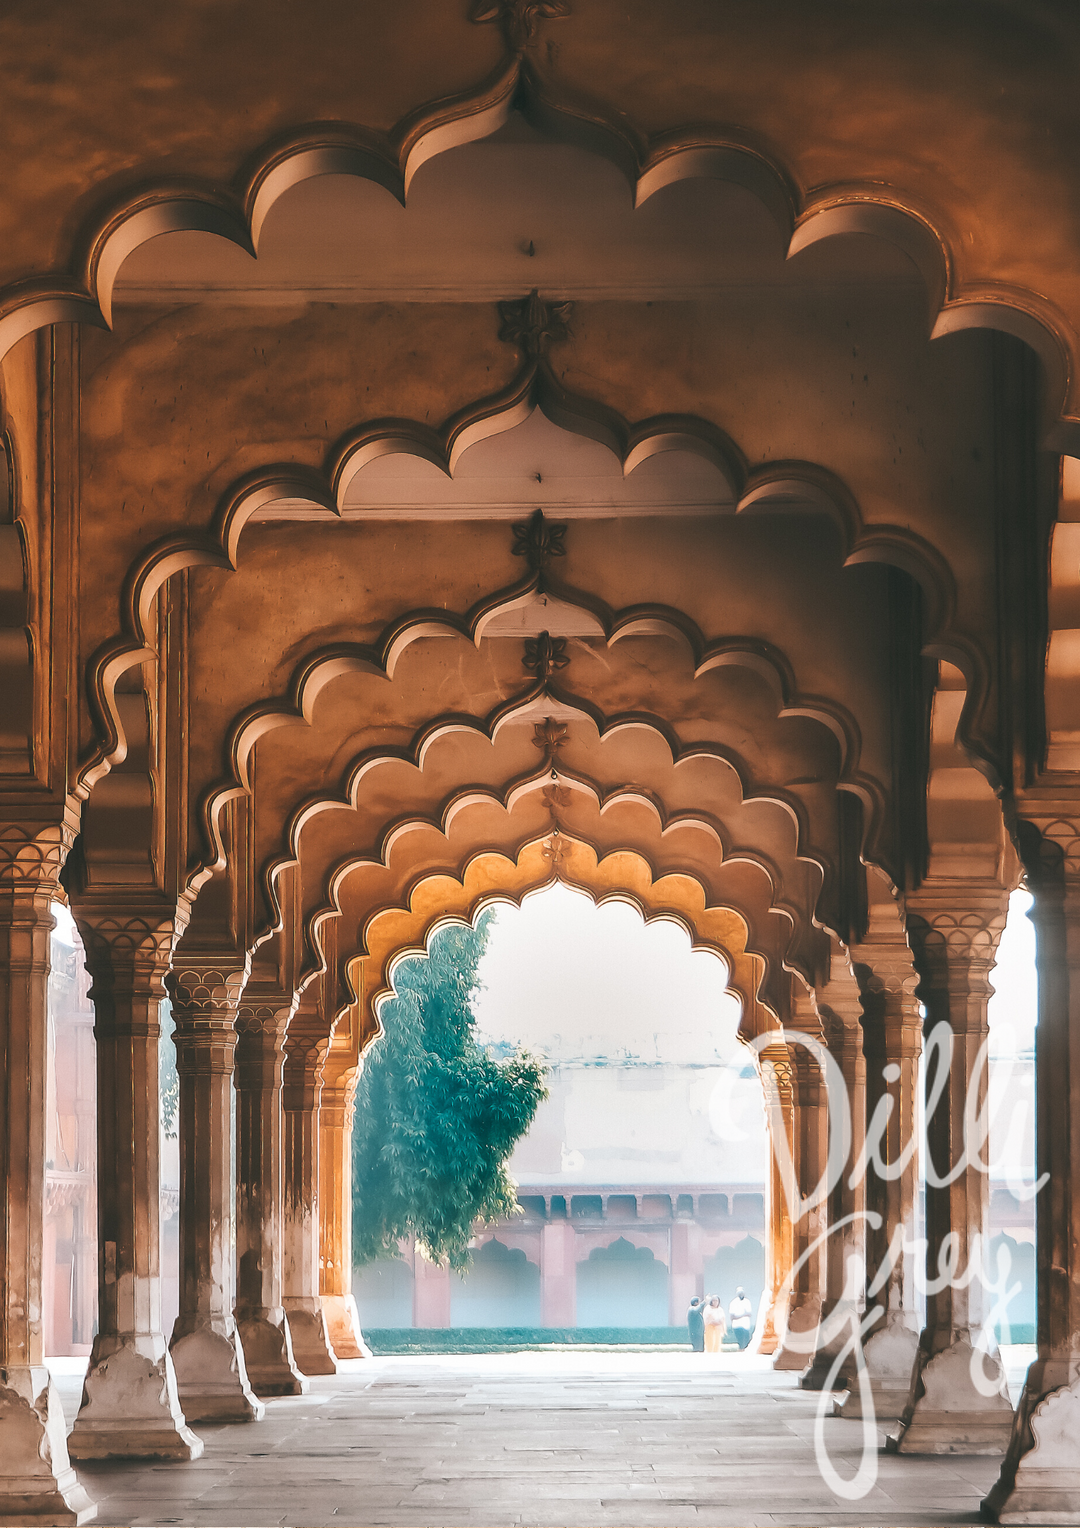 India Icons Series: Red Fort Print - Dilli Grey